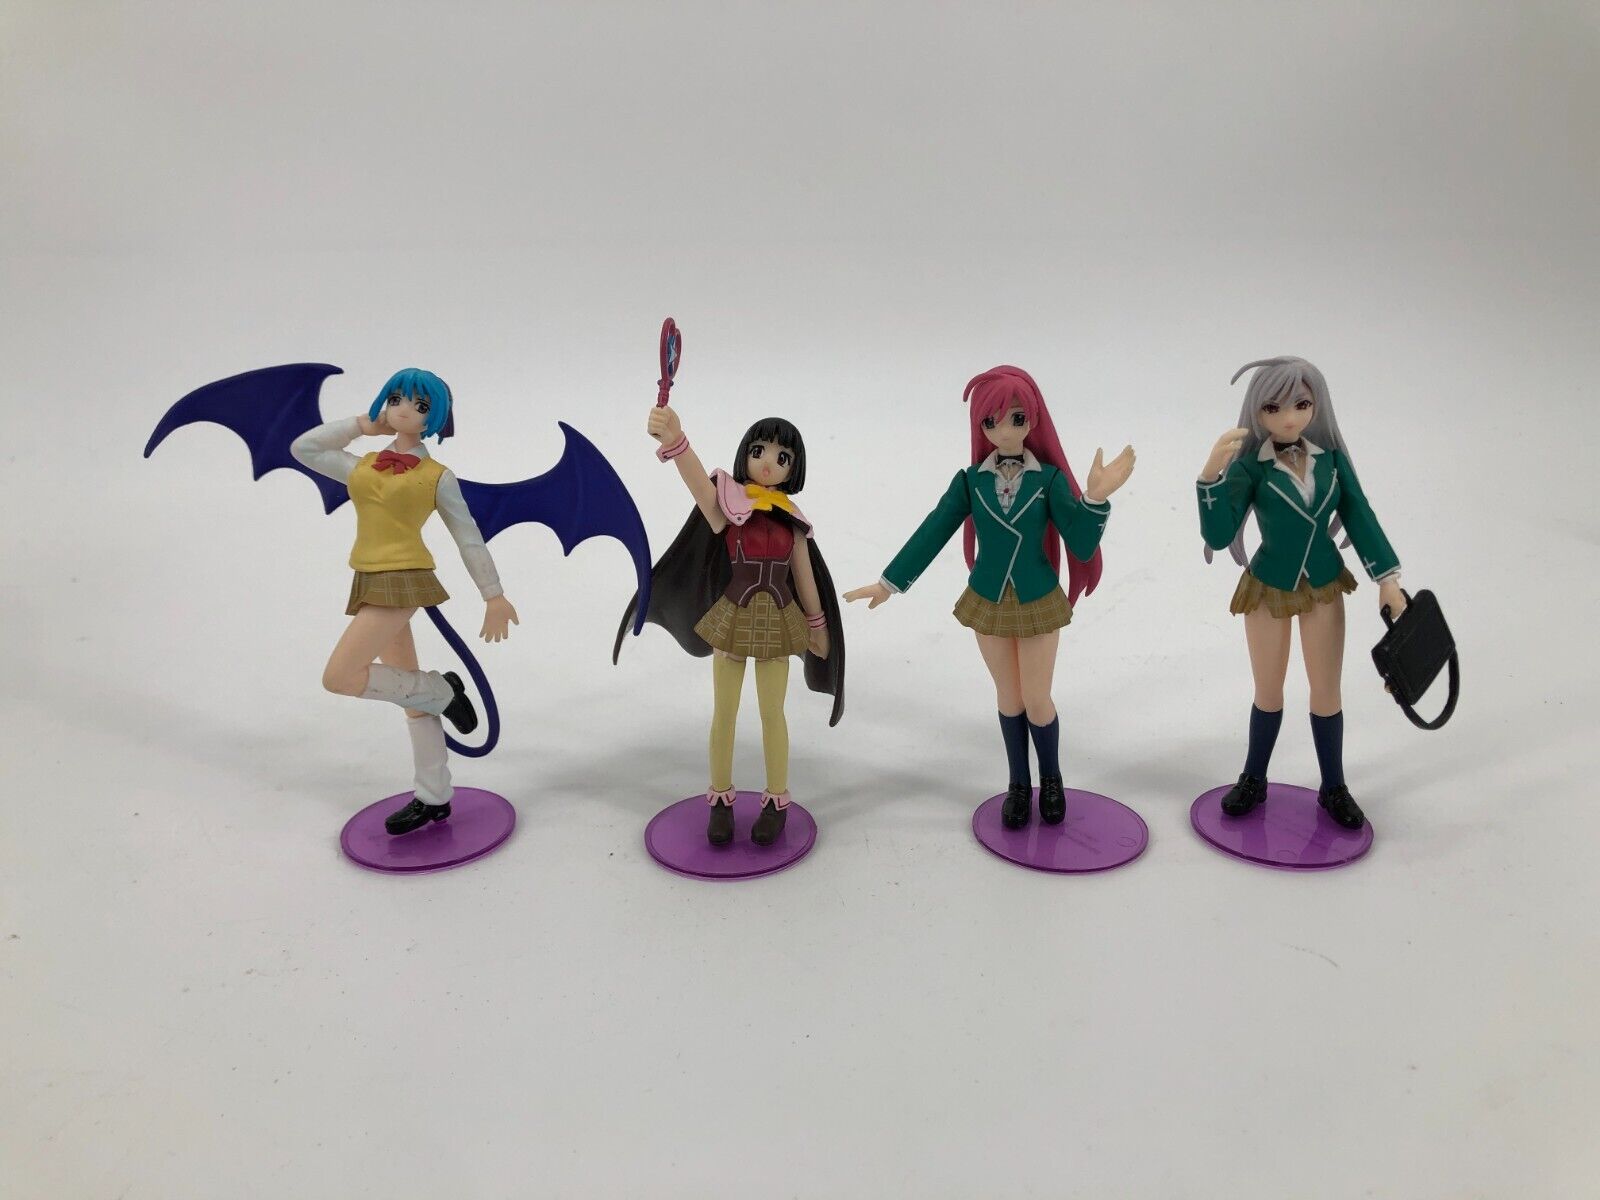 Lot of 4 - Rosario + Vampire Trading Figure Characters COMPLETE